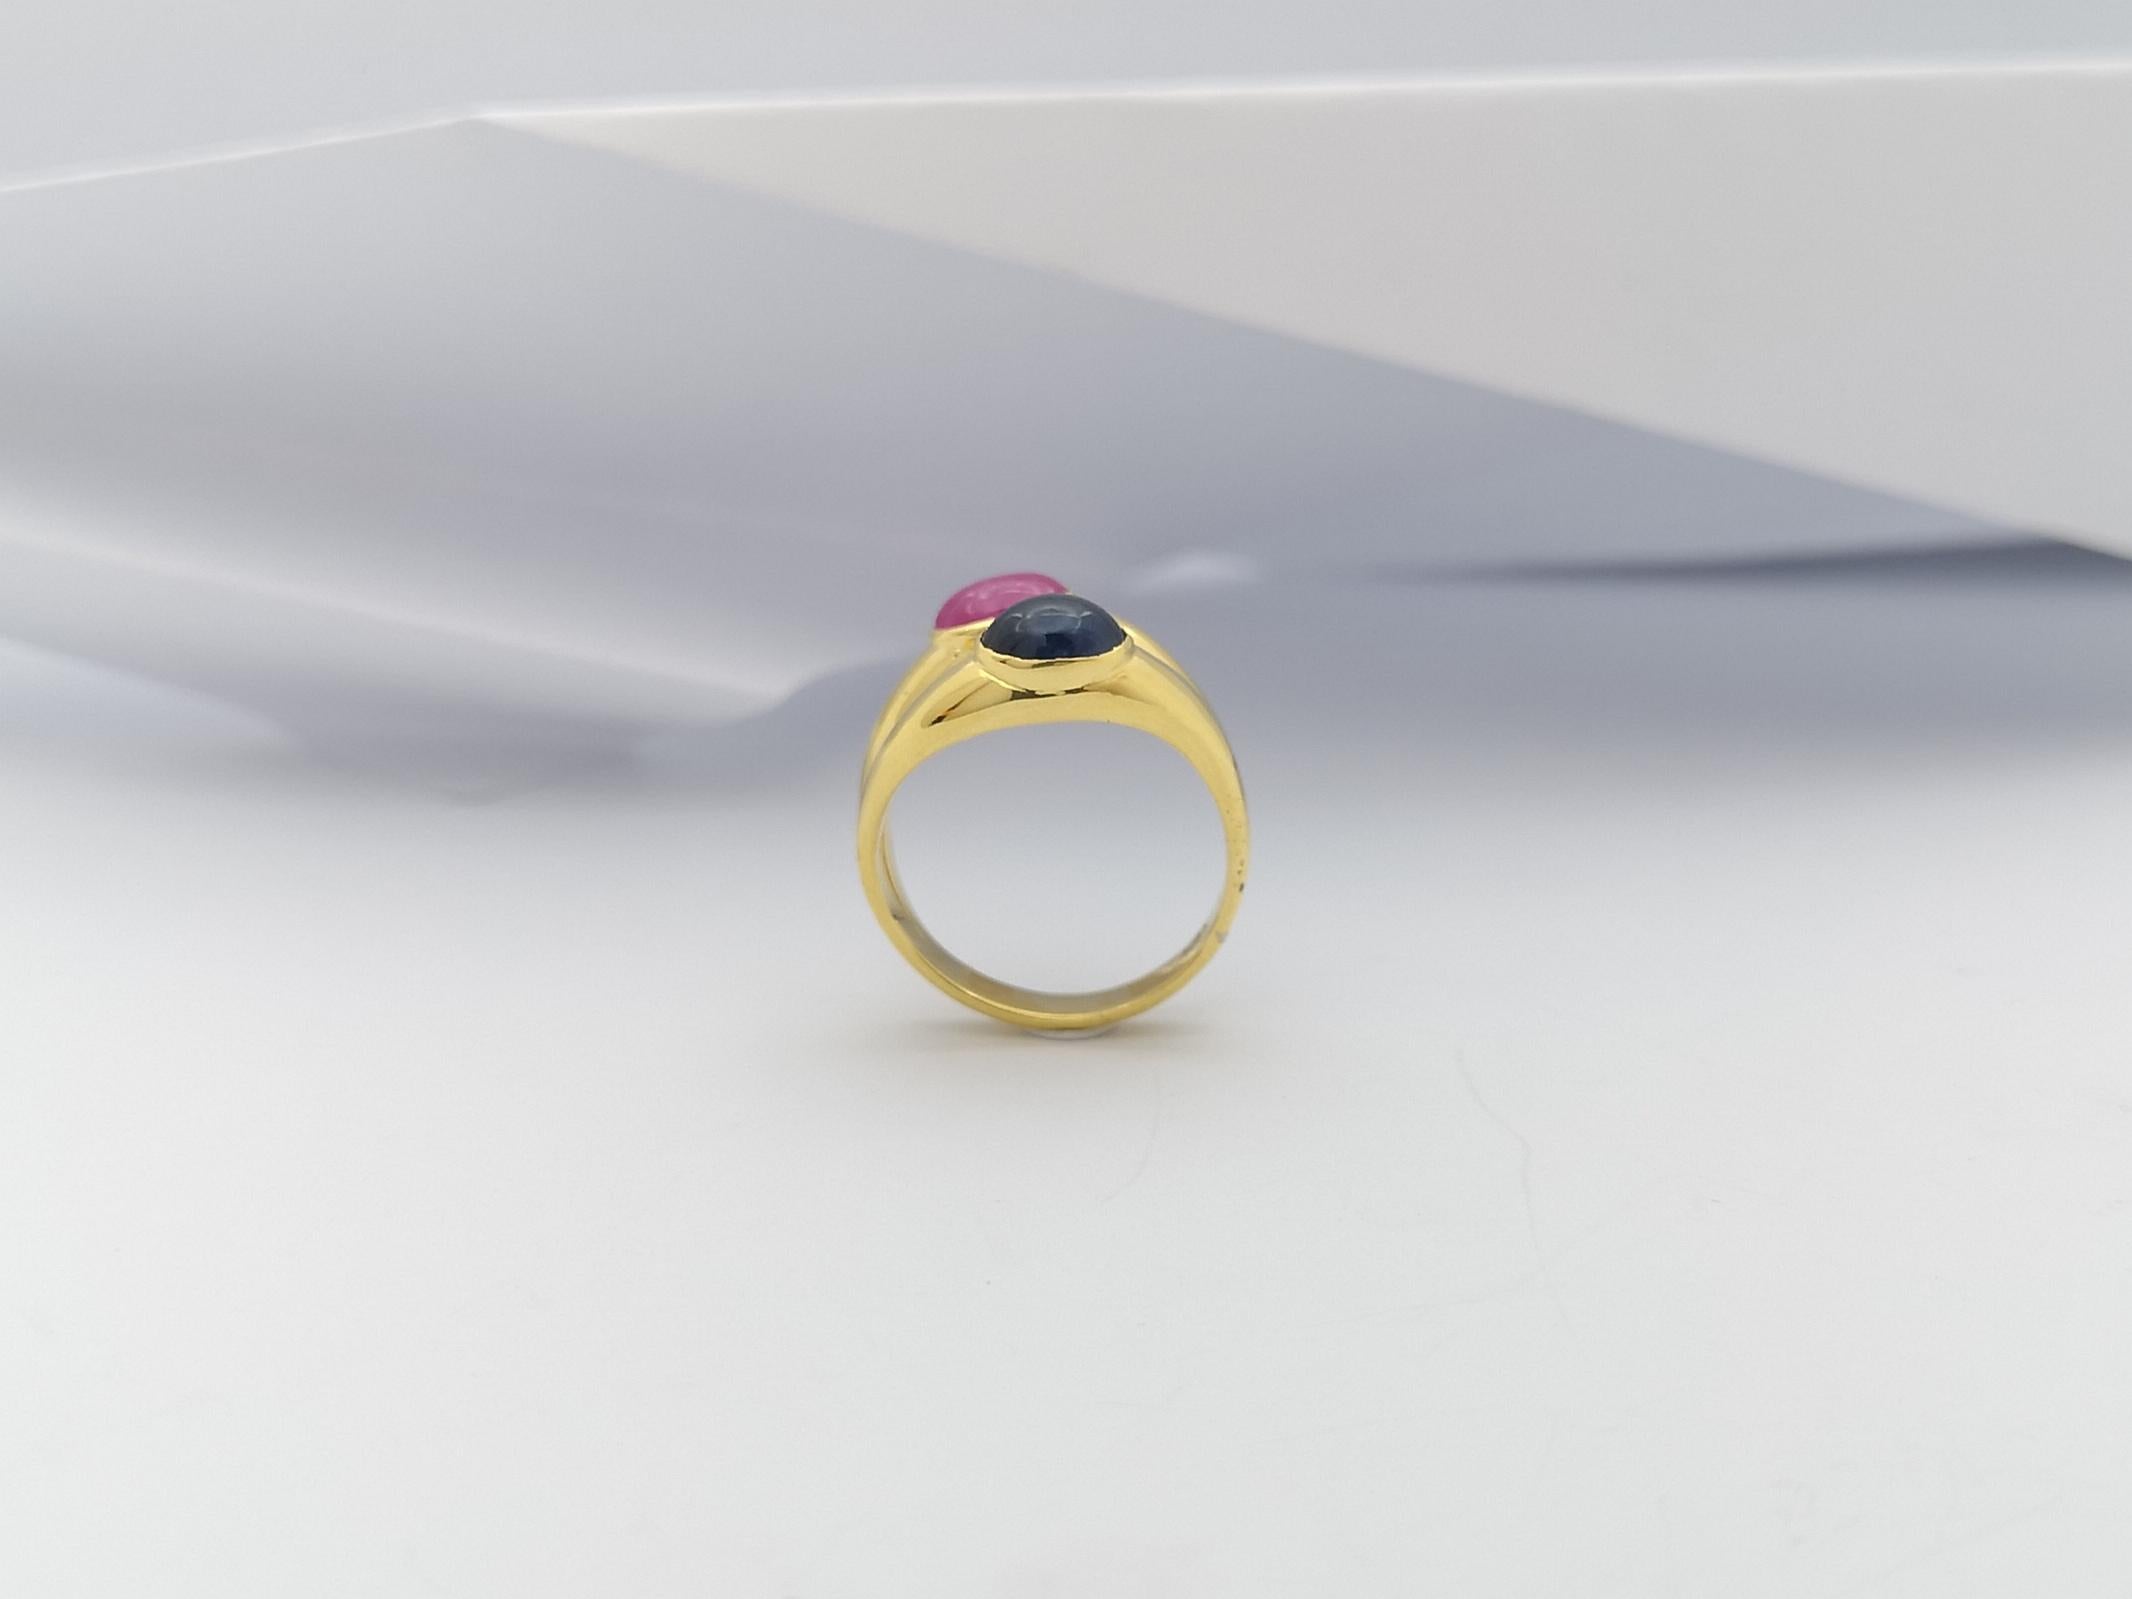 Cabochon Ruby and Cabochon Blue Sapphire Ring Set in 18 Karat Gold Settings For Sale 5